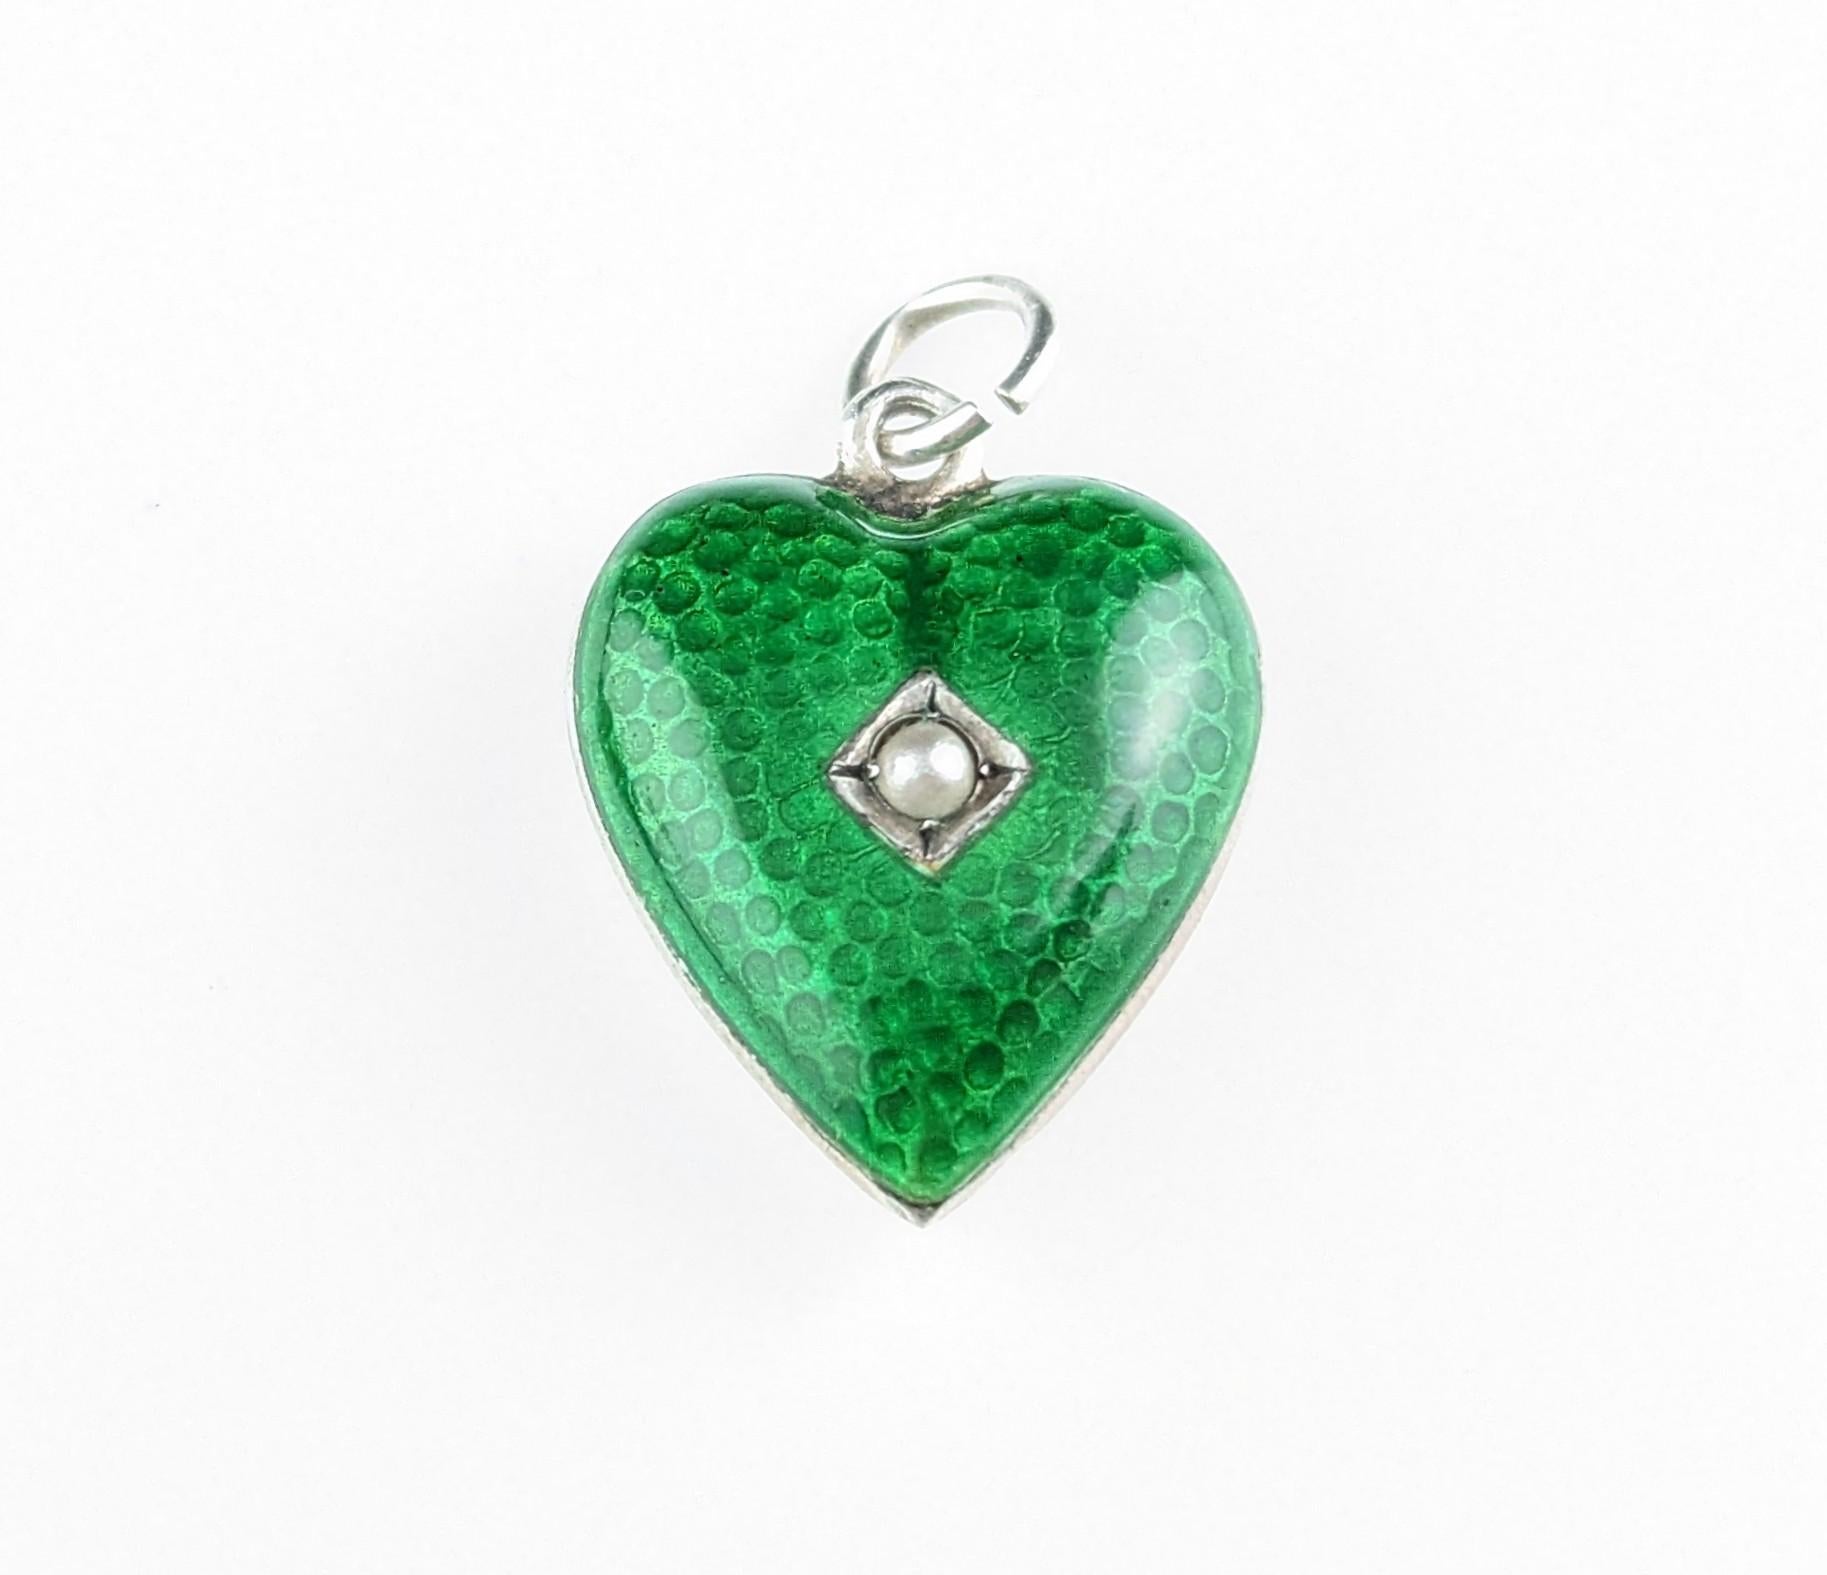 Vintage Art Deco Silver and Green Enamel Heart Pendant, Seed Pearl 6